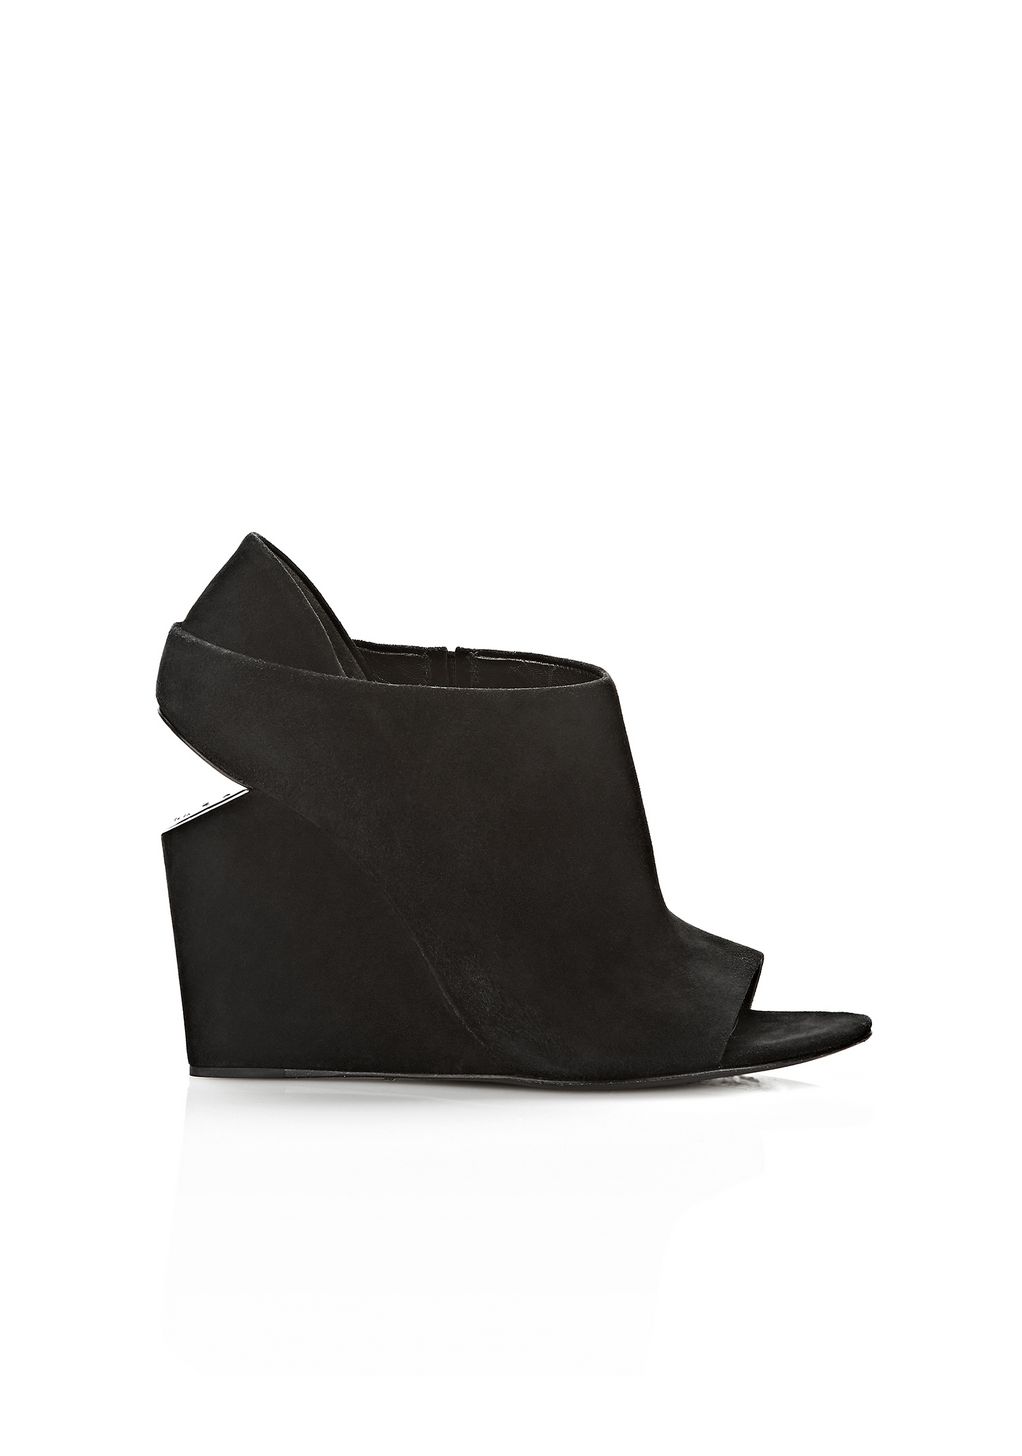 Alexander Wang ‎ALLA SUEDE WEDGE WITH RHODIUM ‎ ‎Heels‎ | Official Site